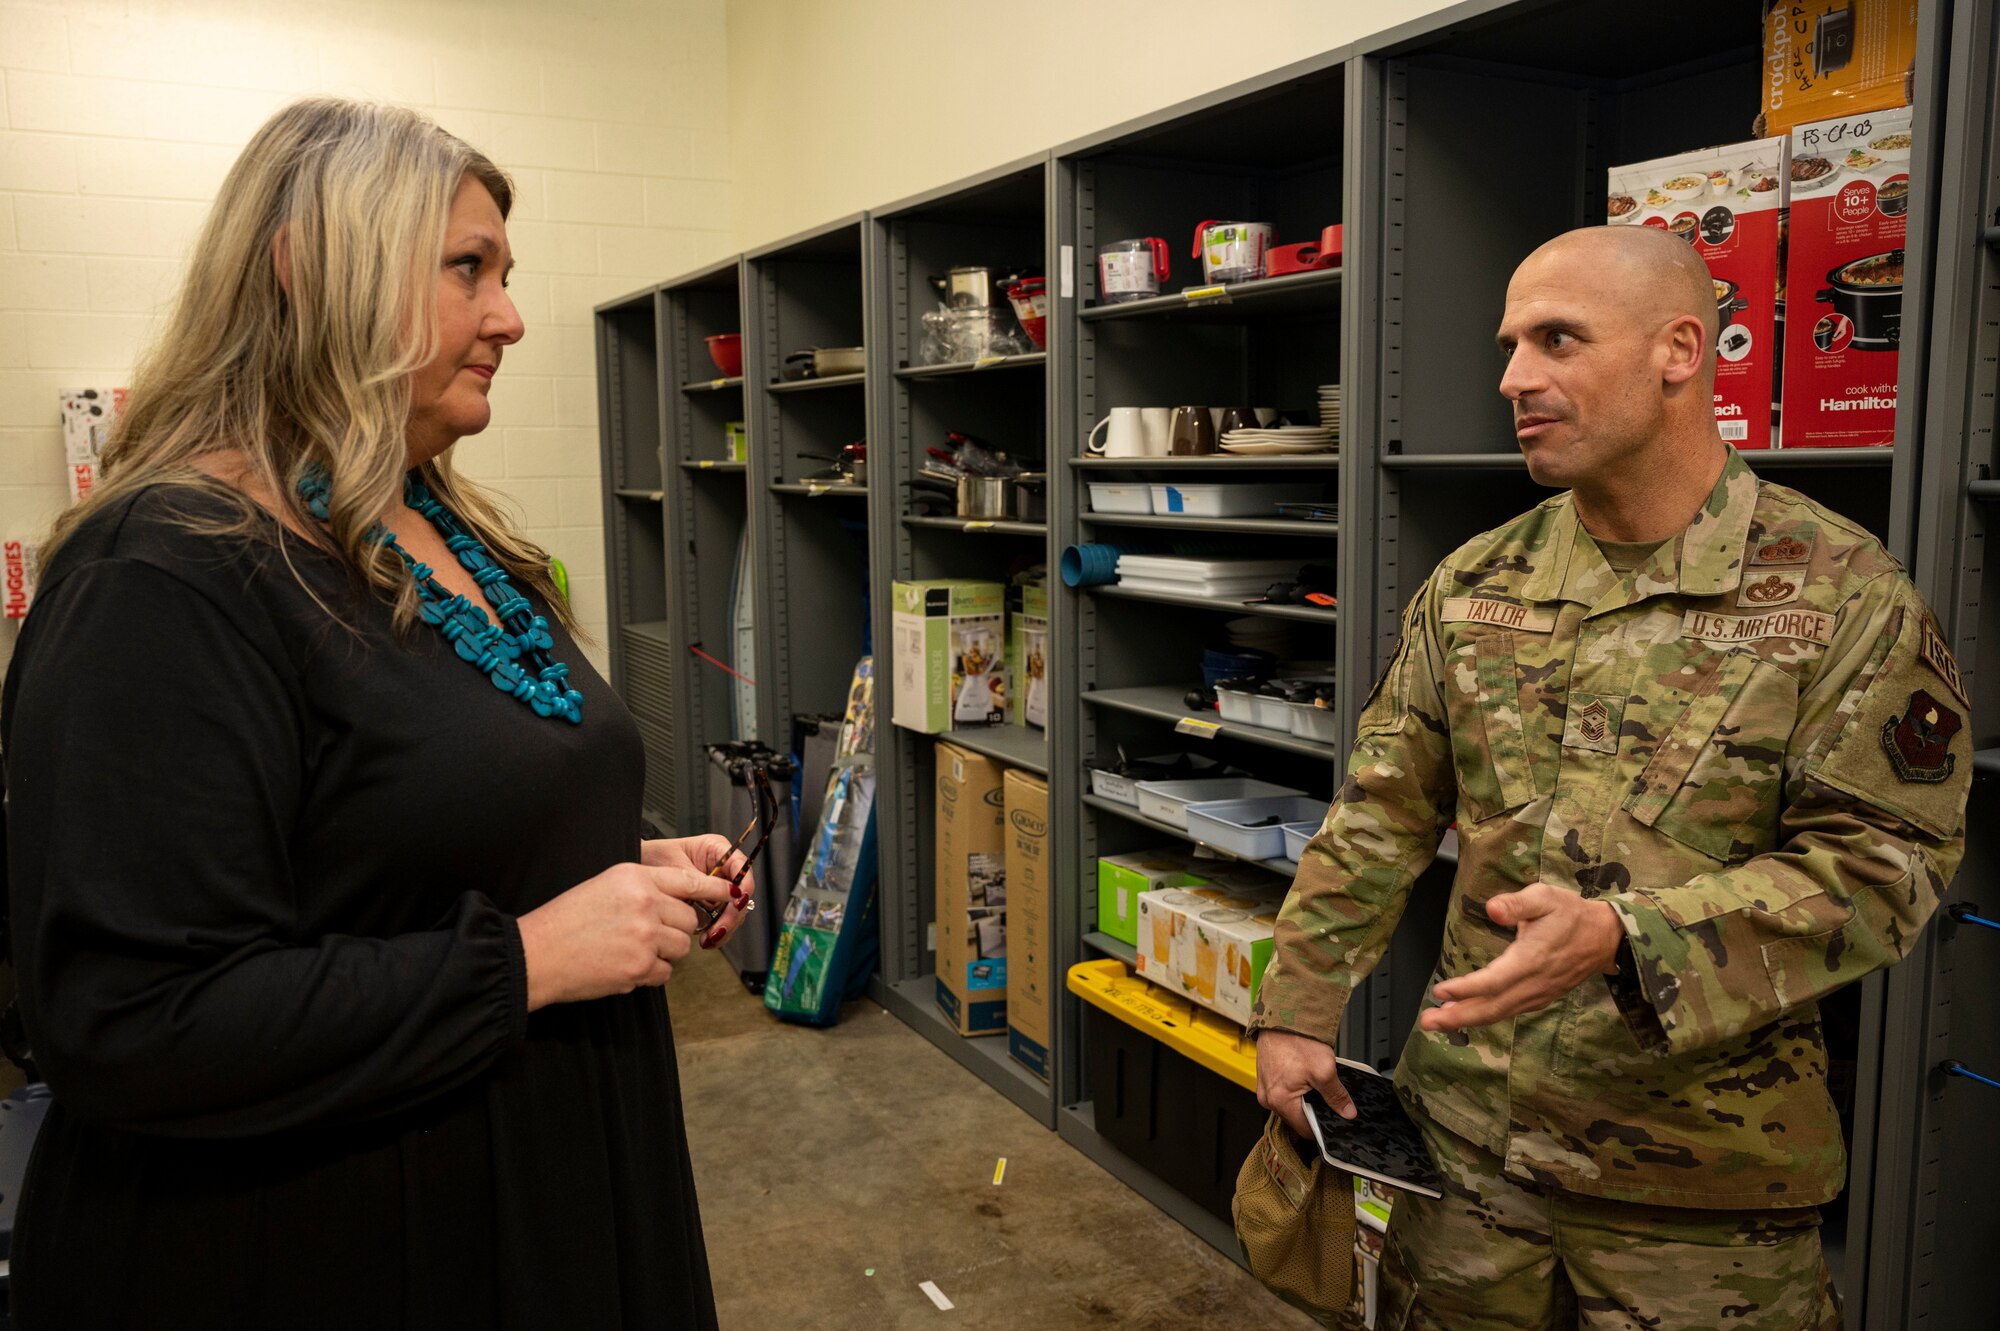 U.S. Air Force Chief Master Sgt. Ryan Taylor, Air Education and Training Command first sergeant, right, speaks with Susan Hunter, 49th Force Support Squadron work-life specialist, about the importance of the Military and Family Readiness Center at Holloman Air Force Base, New Mexico, Dec. 7, 2022. Taylor visited places that help Airmen and their families including the Refuel Cafe and Child Development Center. (U.S. Air Force photo by Airman 1st Class Nicholas Paczkowski)